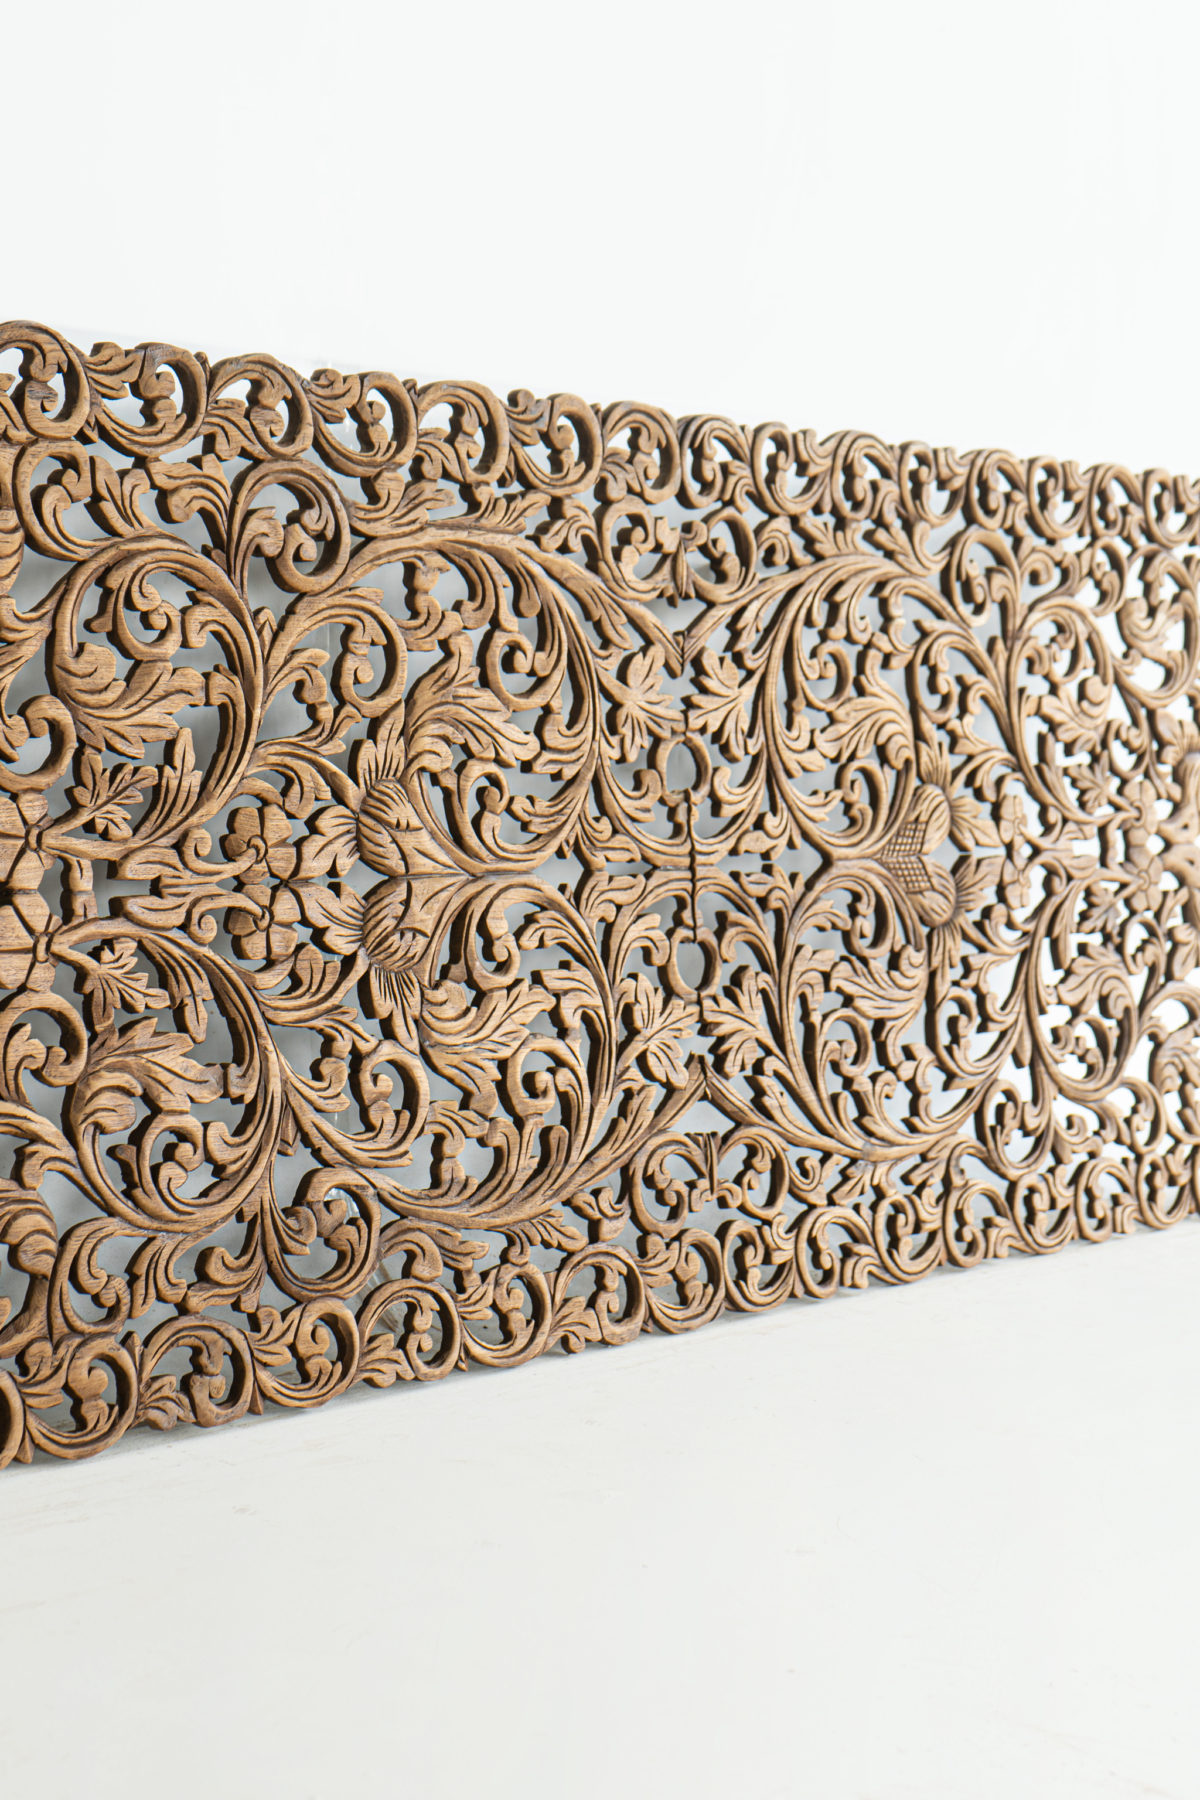 Wooden plaques carving